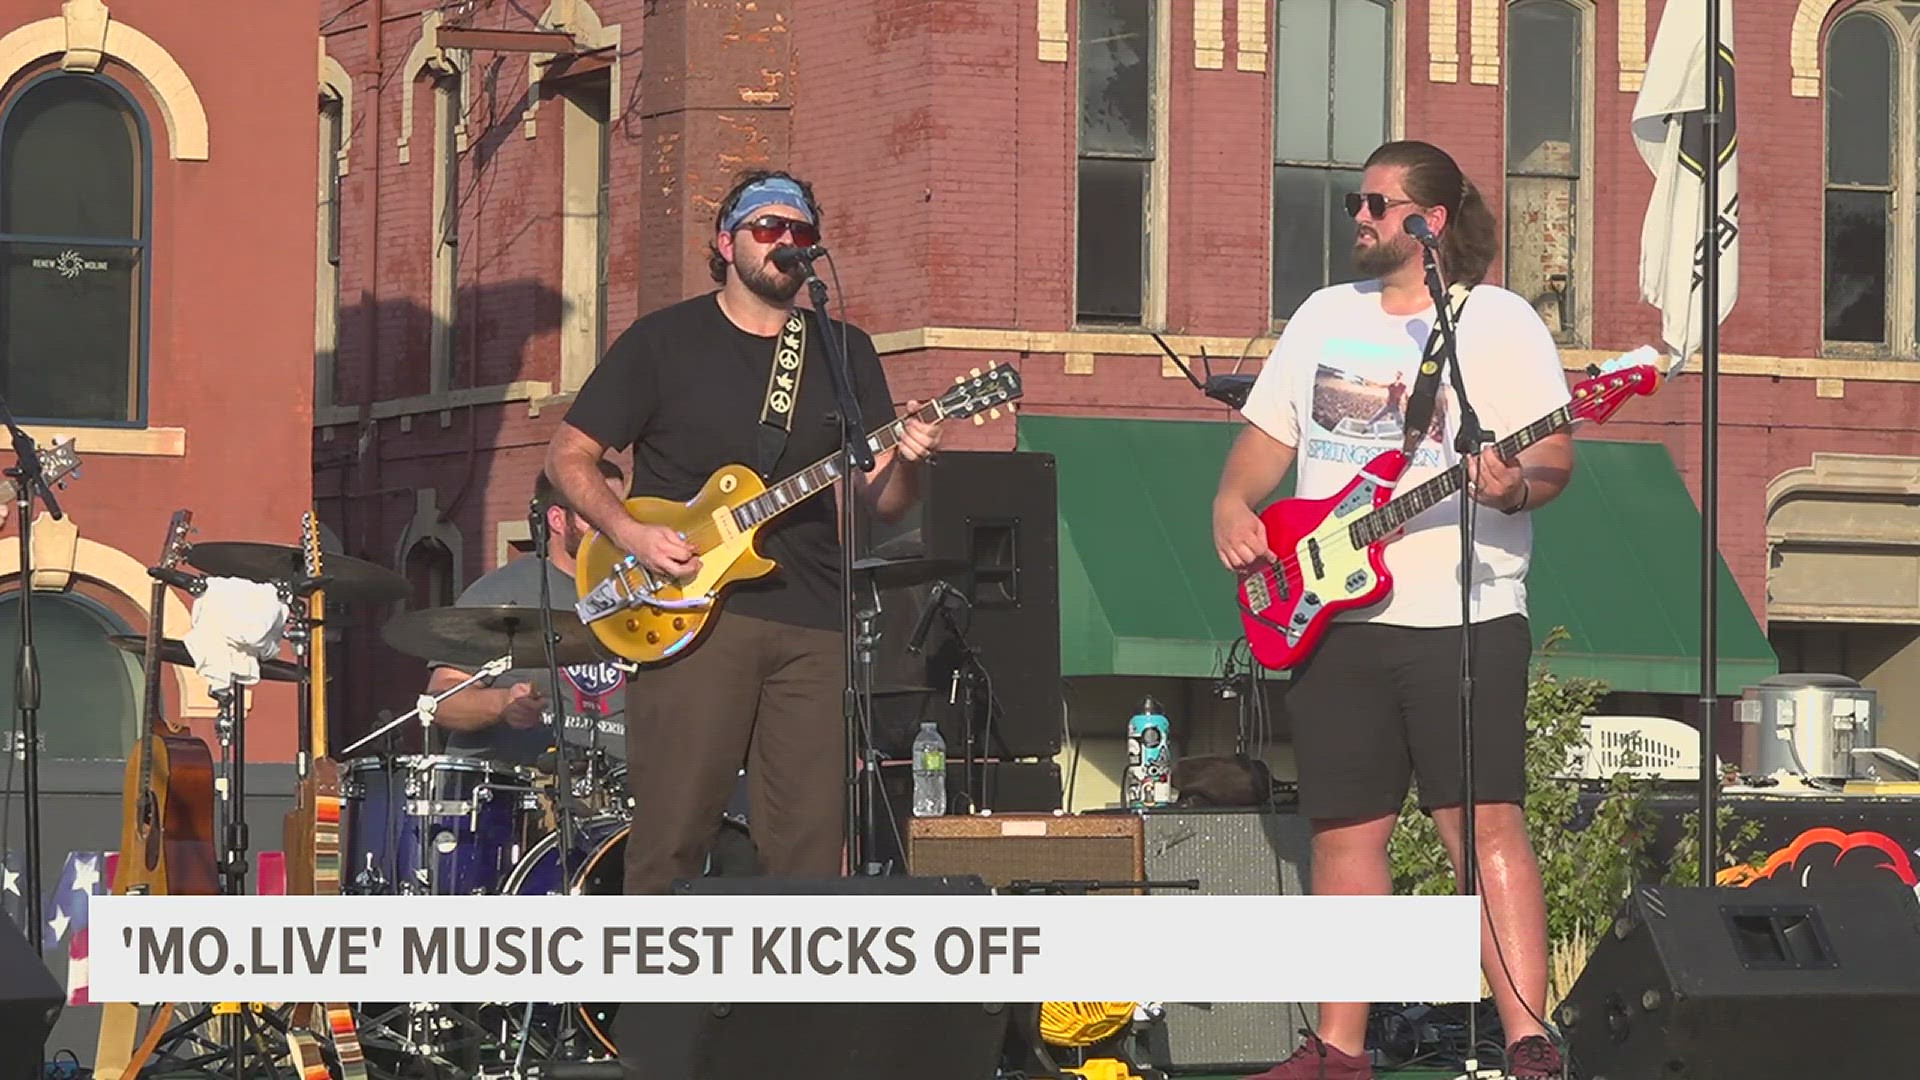 The new 2-day festival was created after the successful Moline 150 celebration last year.